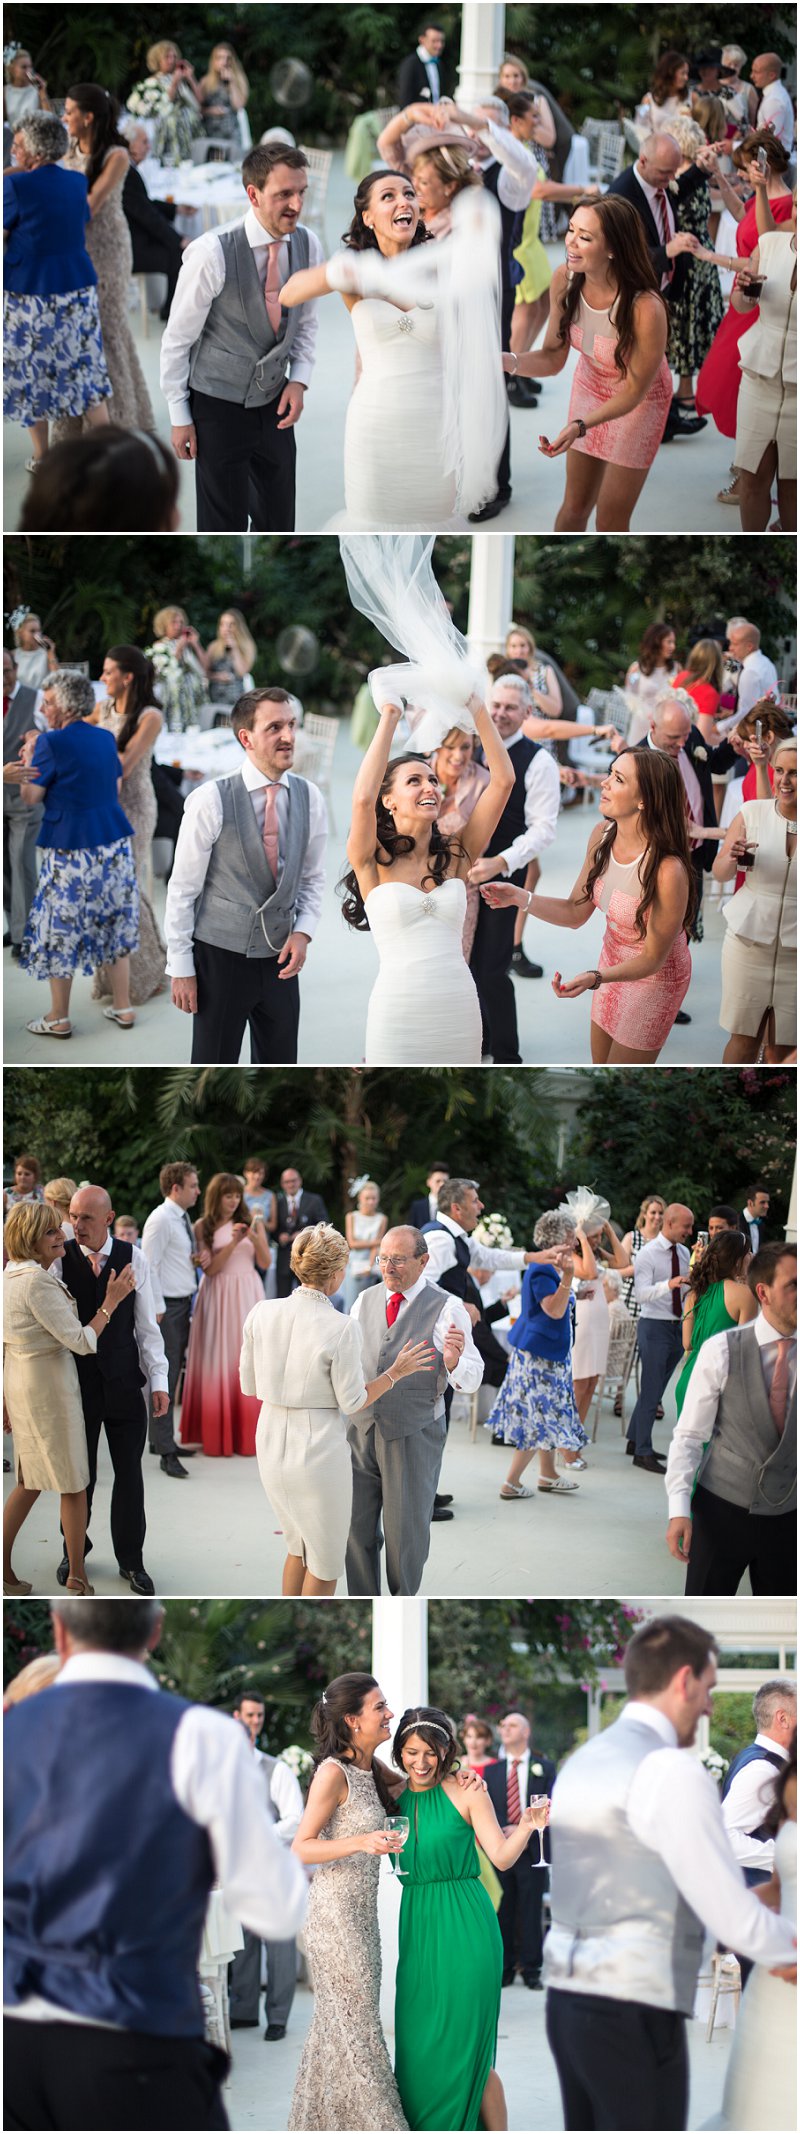 Fun and Natural Pictures at Sefton Palm House Wedding